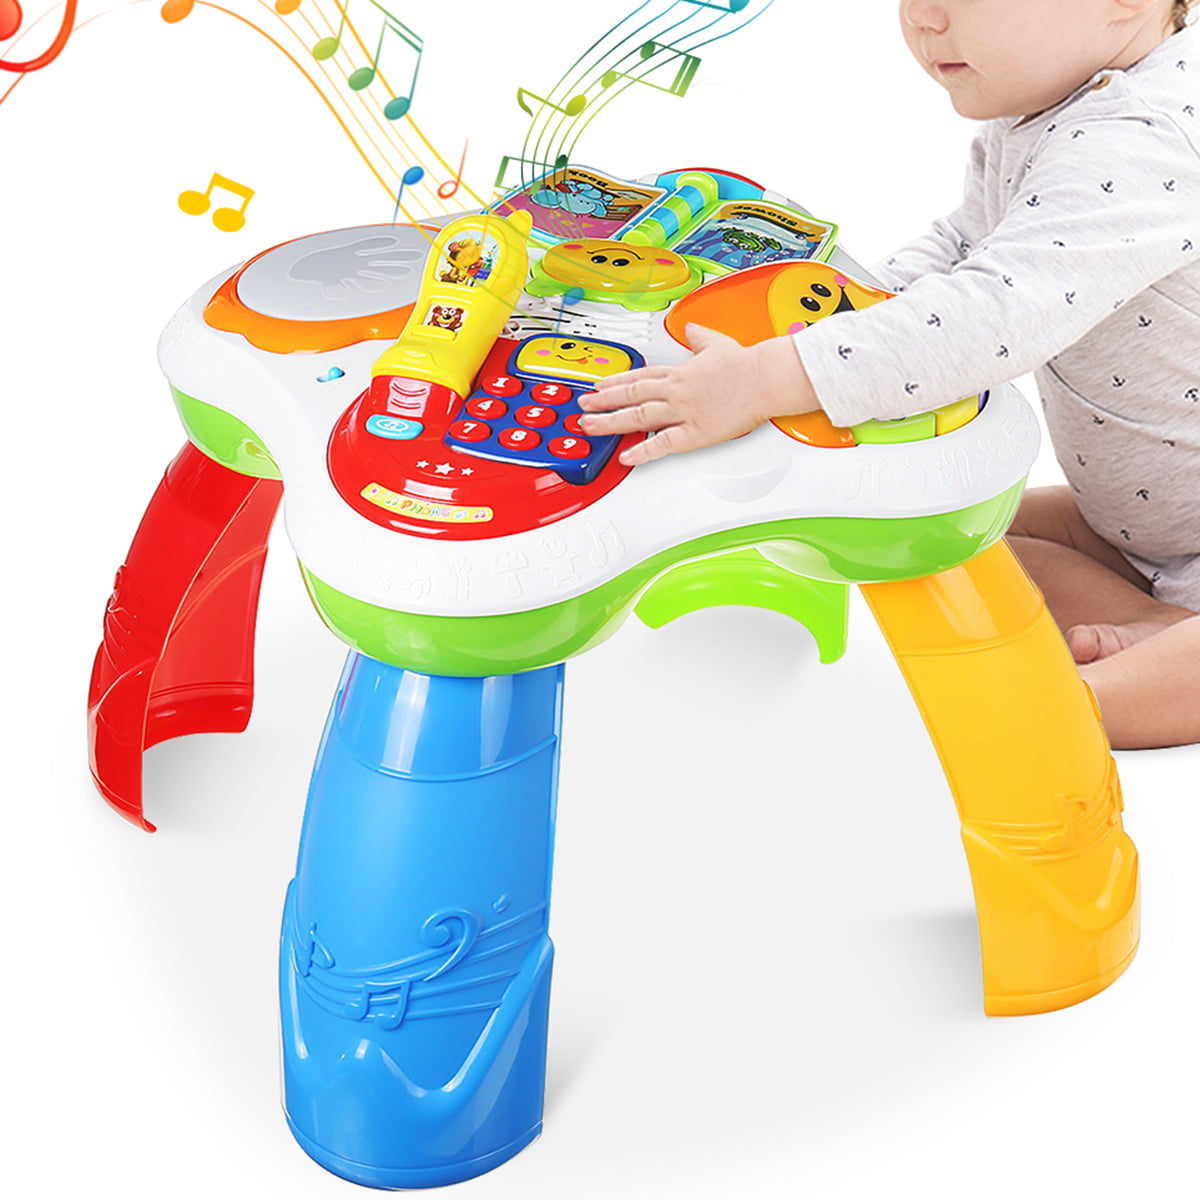 Baby Activity Table Toys 3 in 1 Early Education Musical Learning Table Kids Gift 